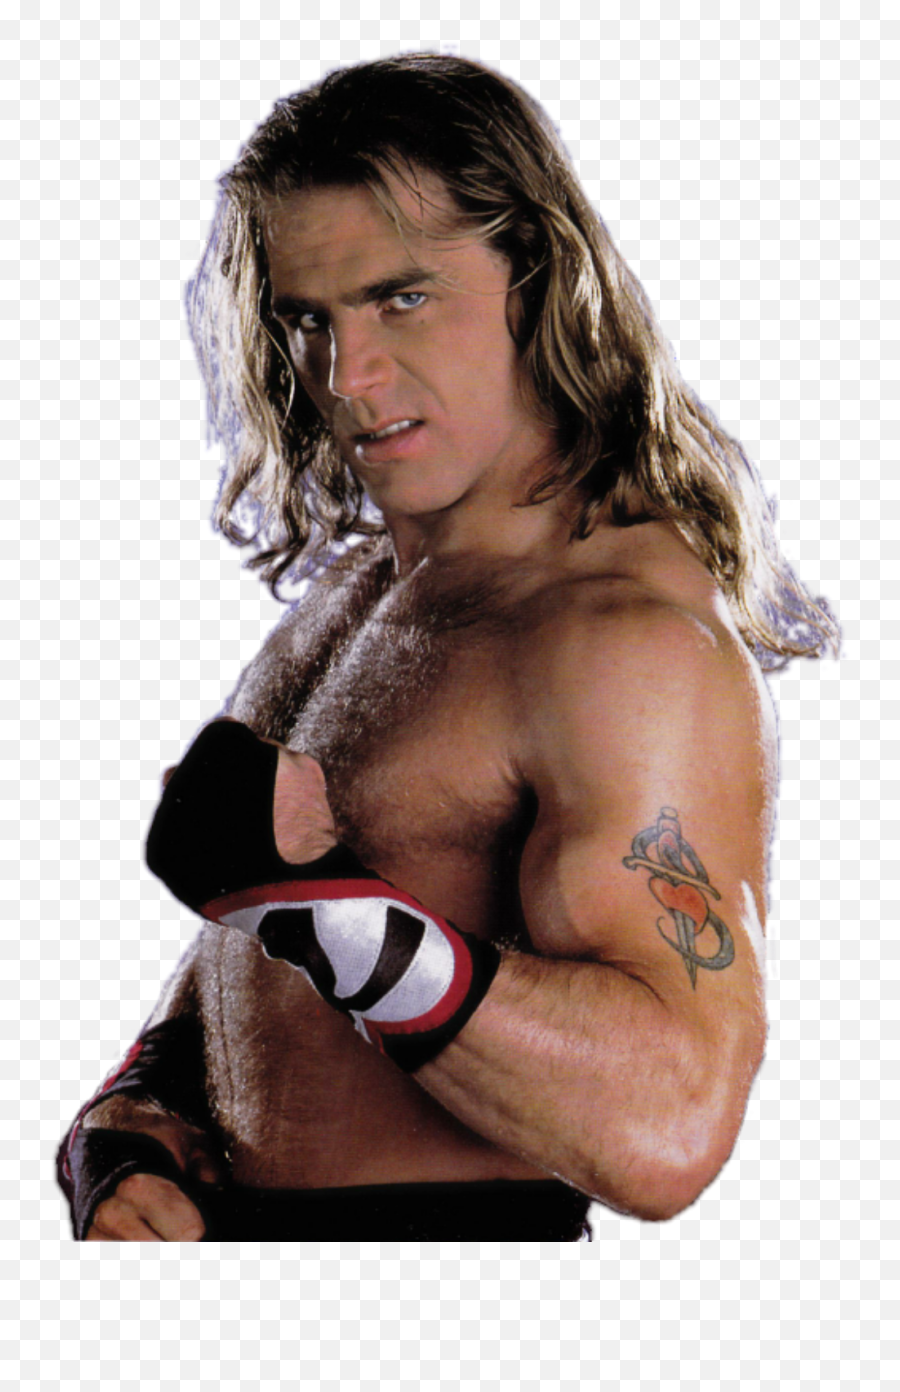 Shawn Michaels - Wwe Image Id 150025 Image Abyss Shawn Michaels Wallpaper Hd Png,Shawn Michaels Png